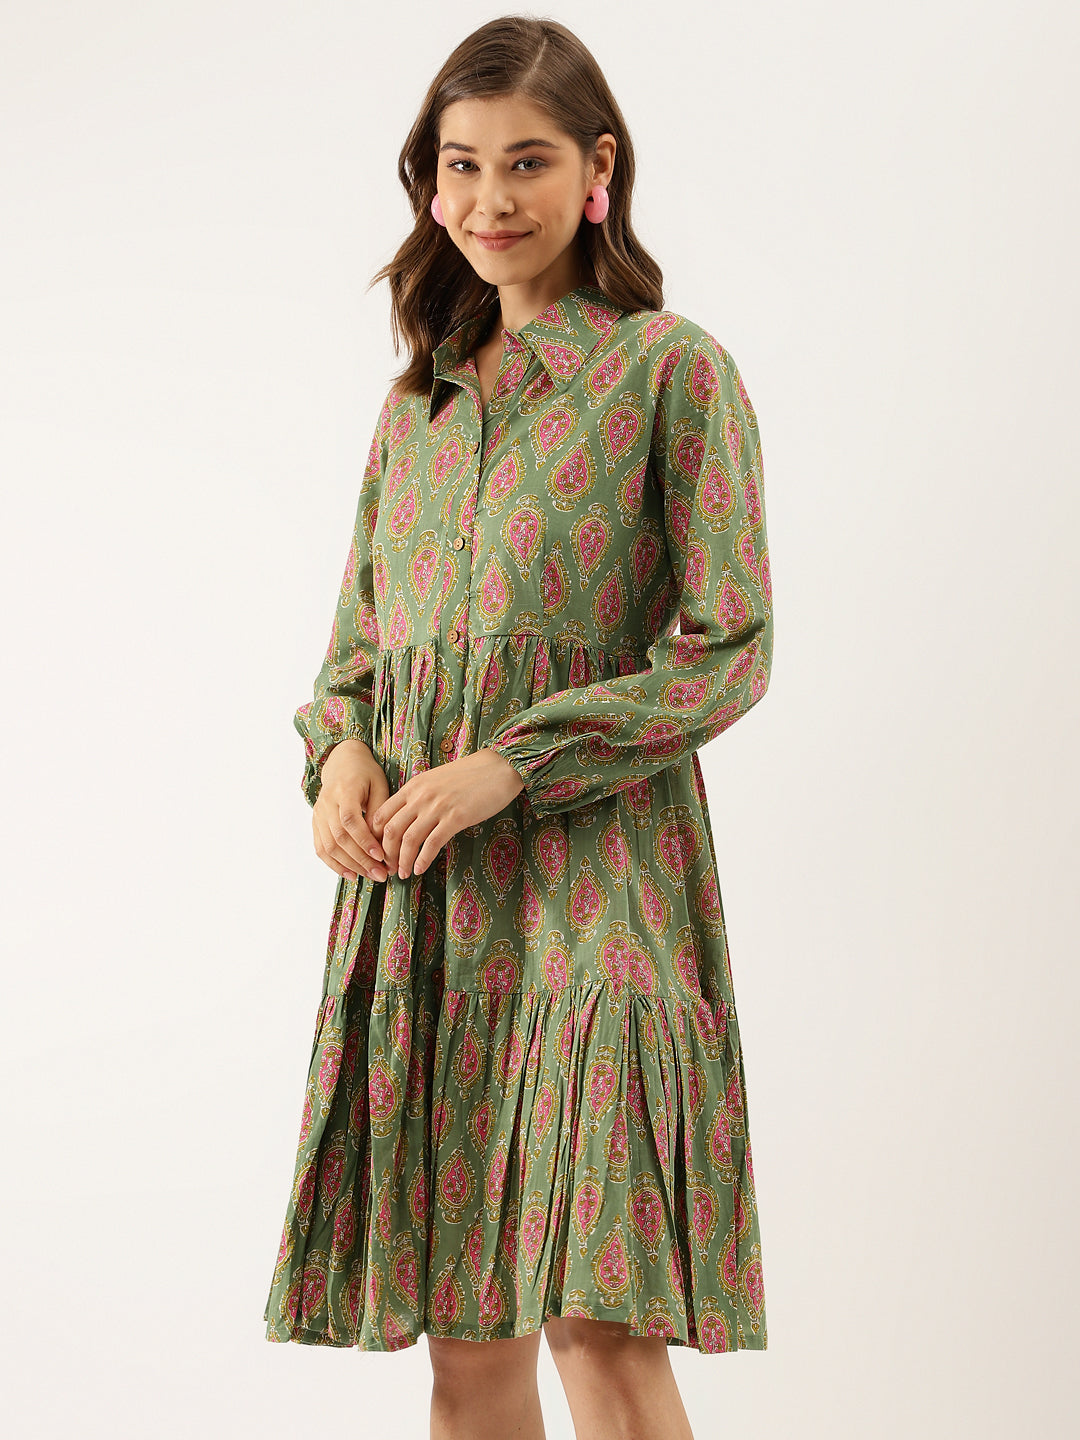 Green Paisley Printed Cotton Dress for Women